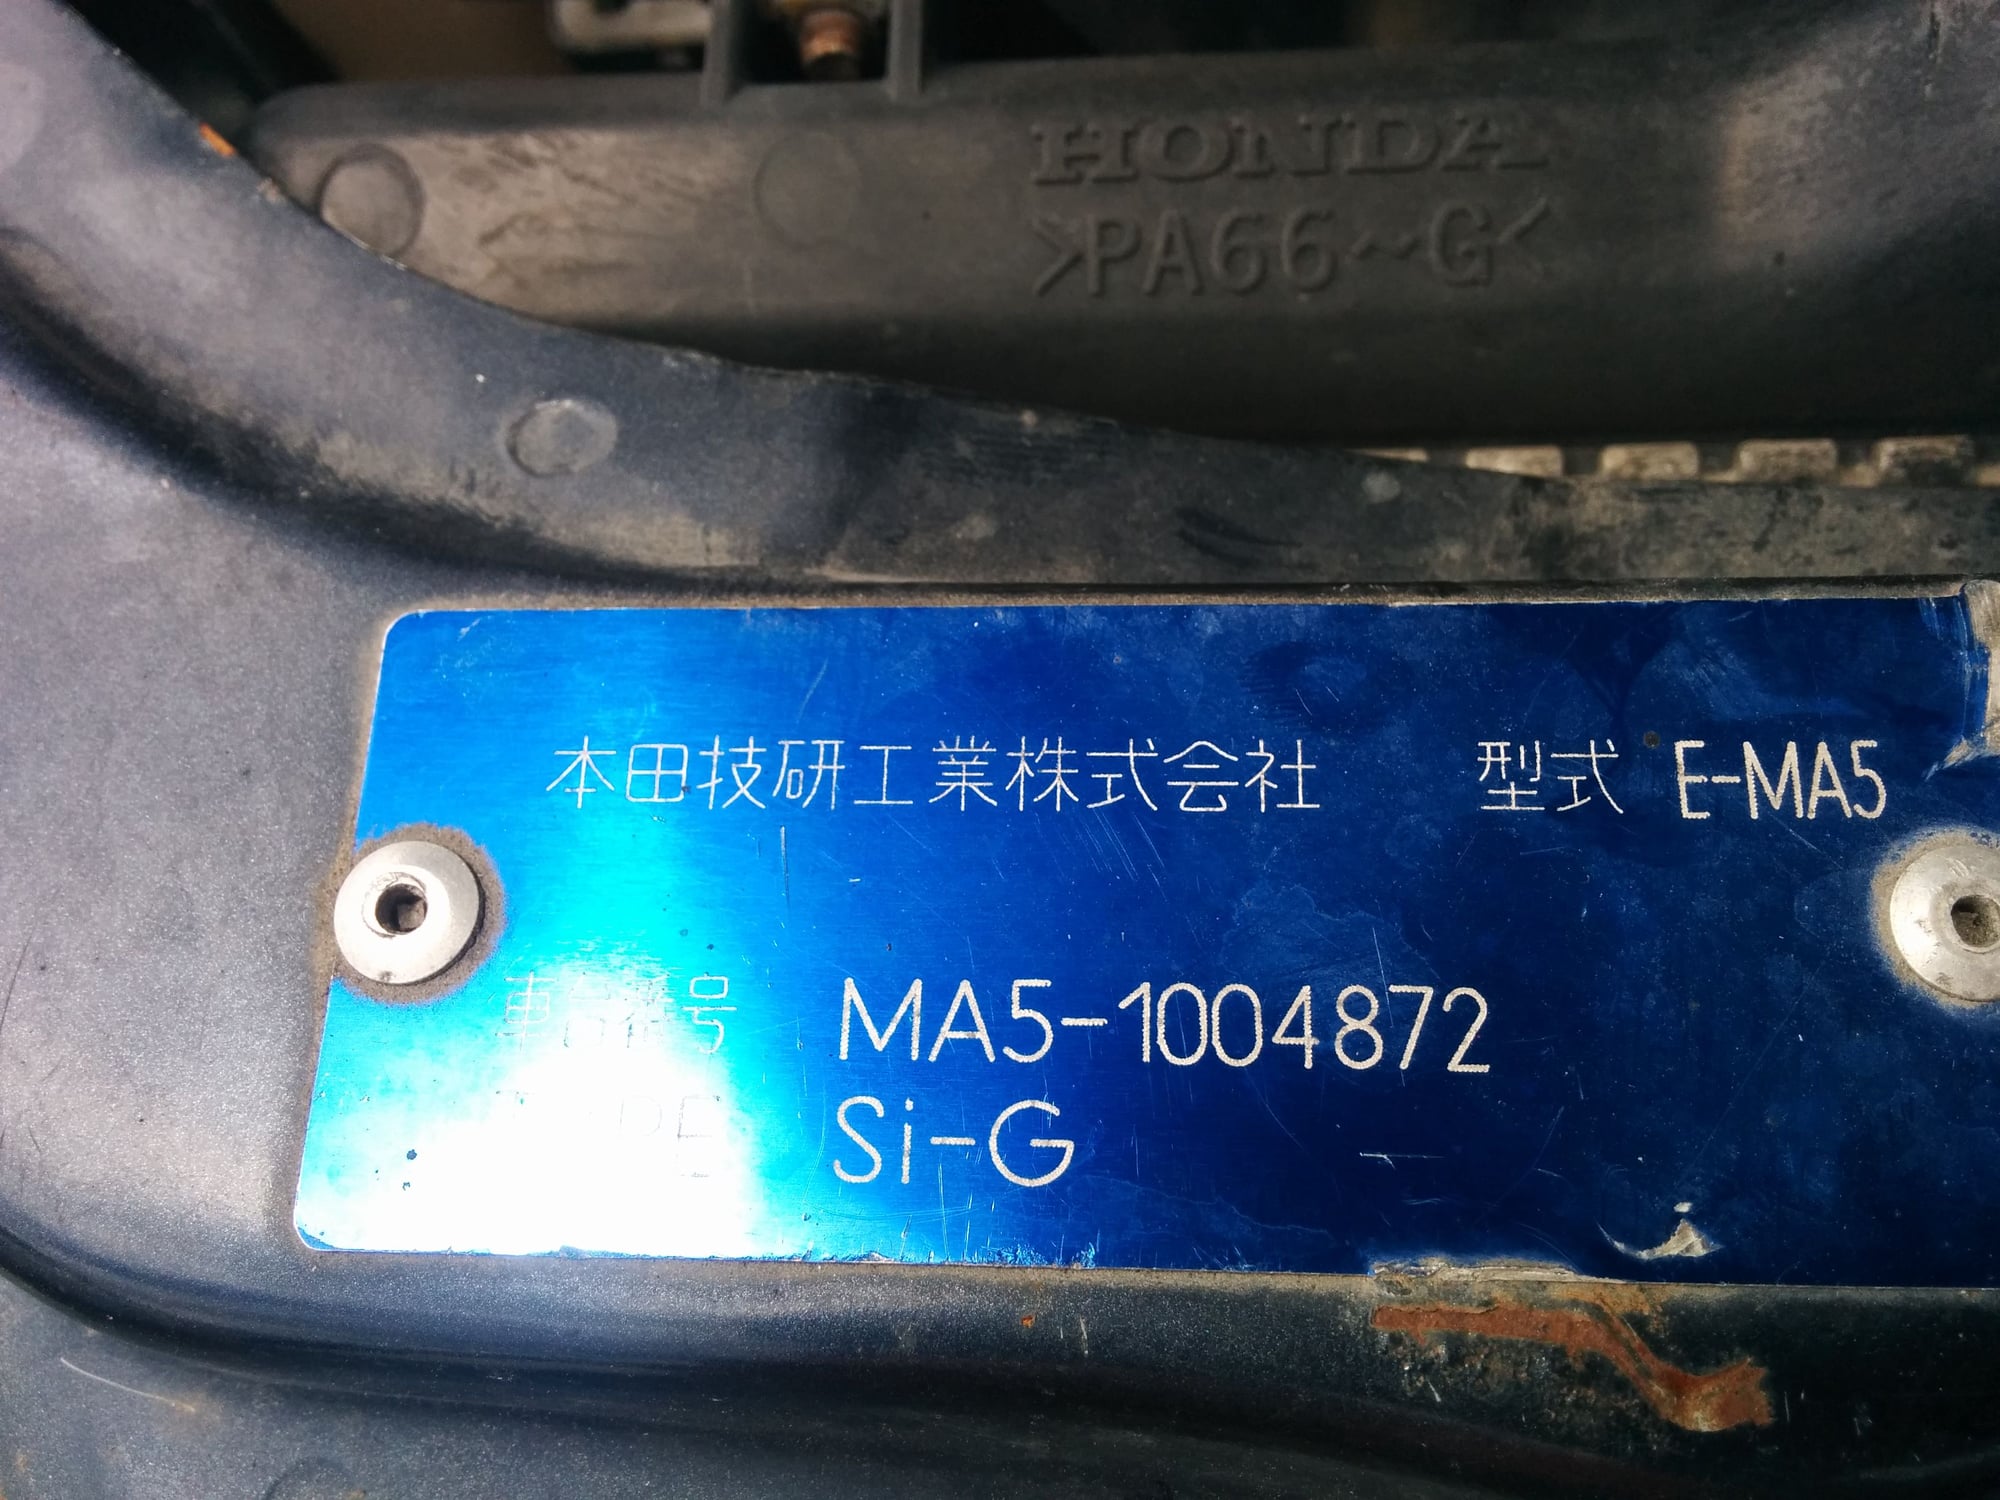 [THEORETICAL DIY] OEM JDM 5G 92-95 Civic Traction Control System (TCS